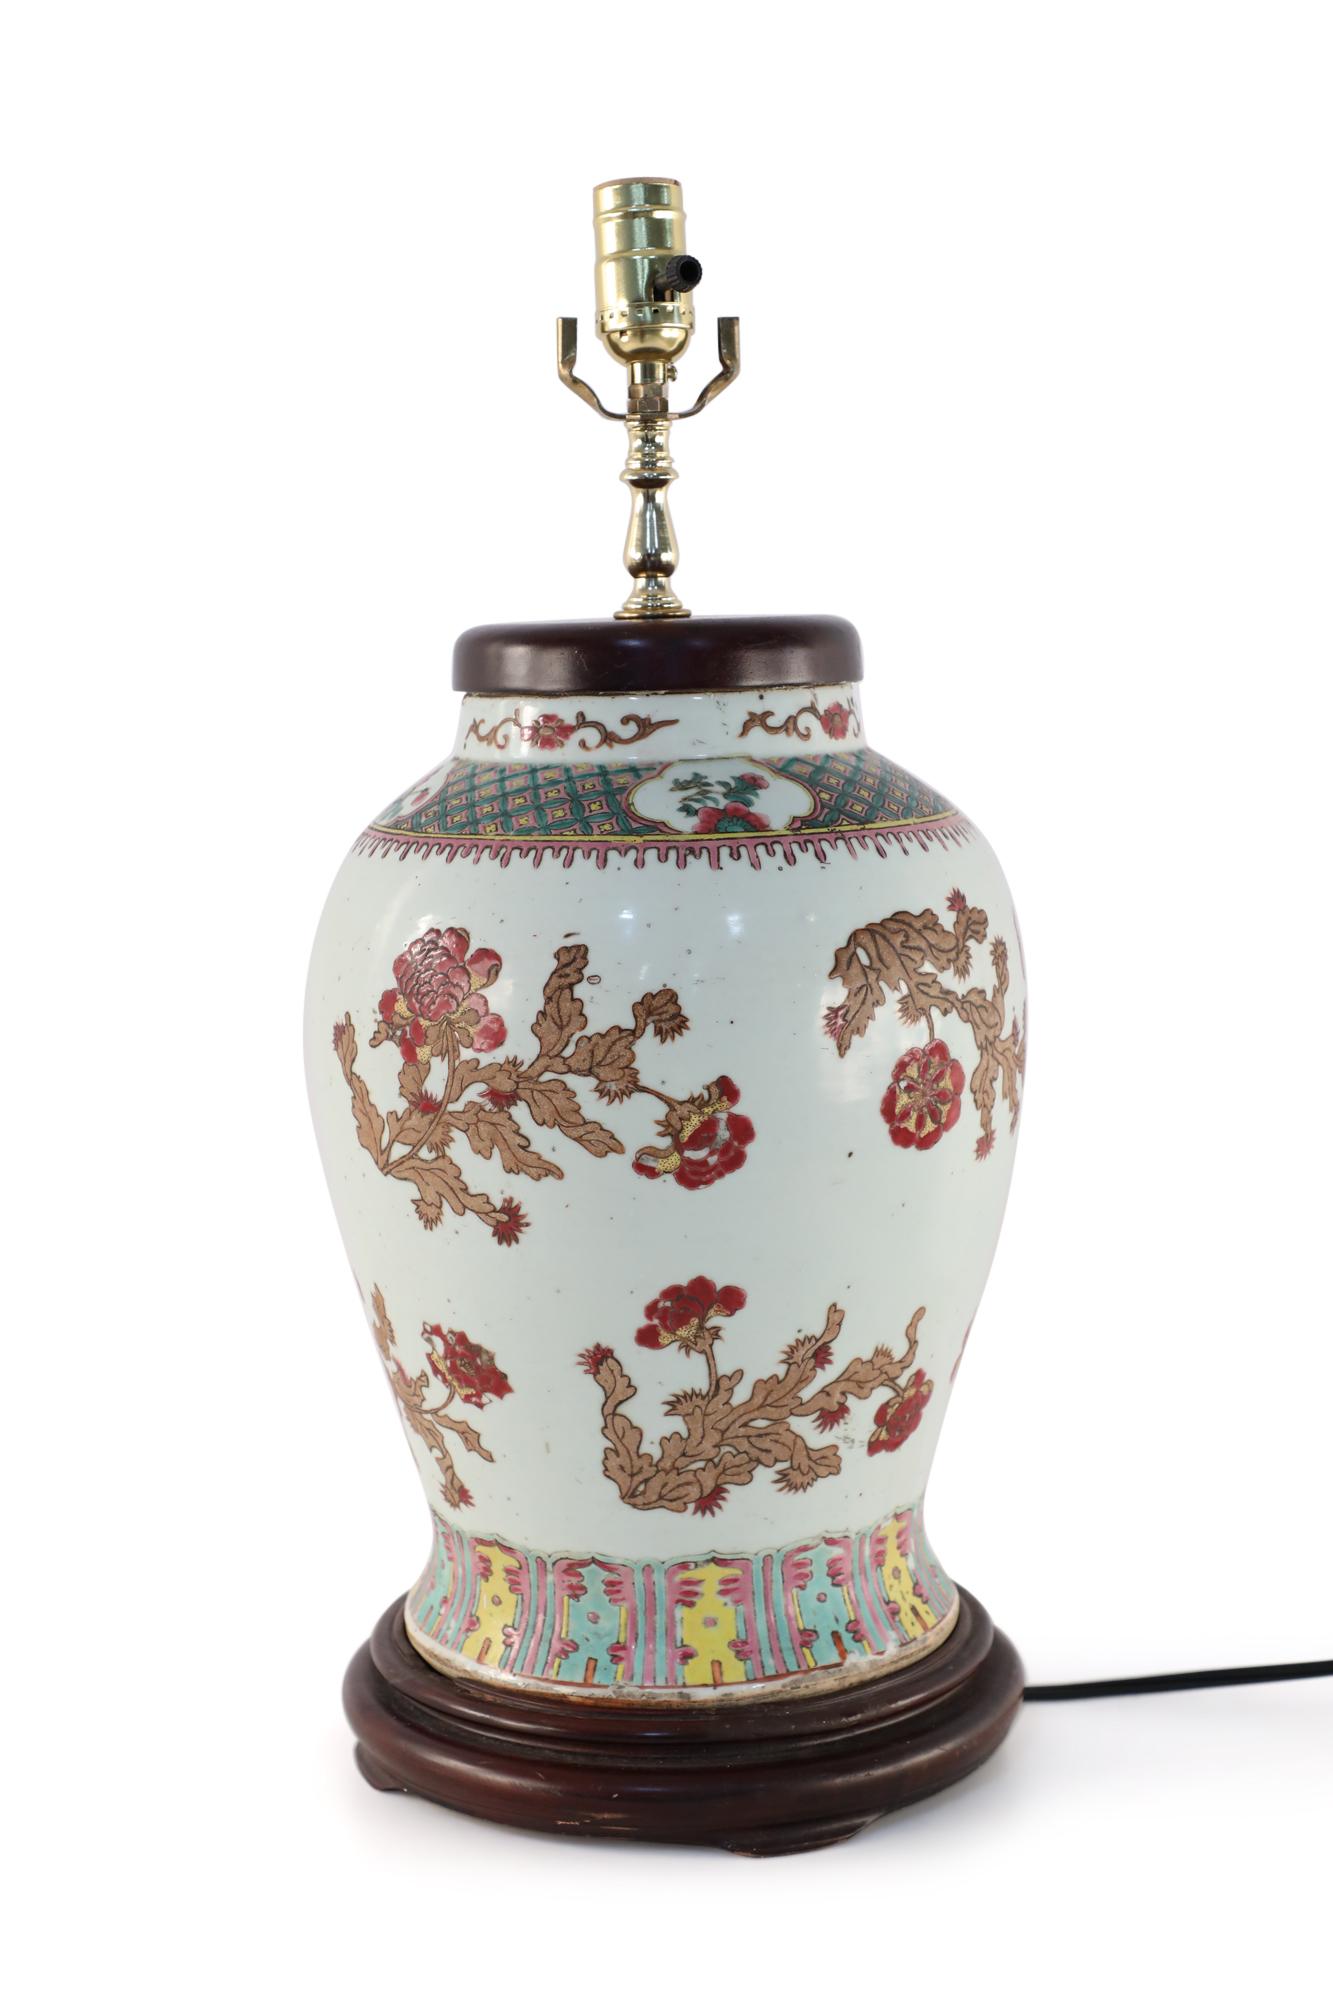 Chinese off-white porcelain table lamp made from a baluster-shaped vase decorated with a motif of beige foliage punctuated by red florals and two colorful geometric bands, a wooden base and brass hardware.